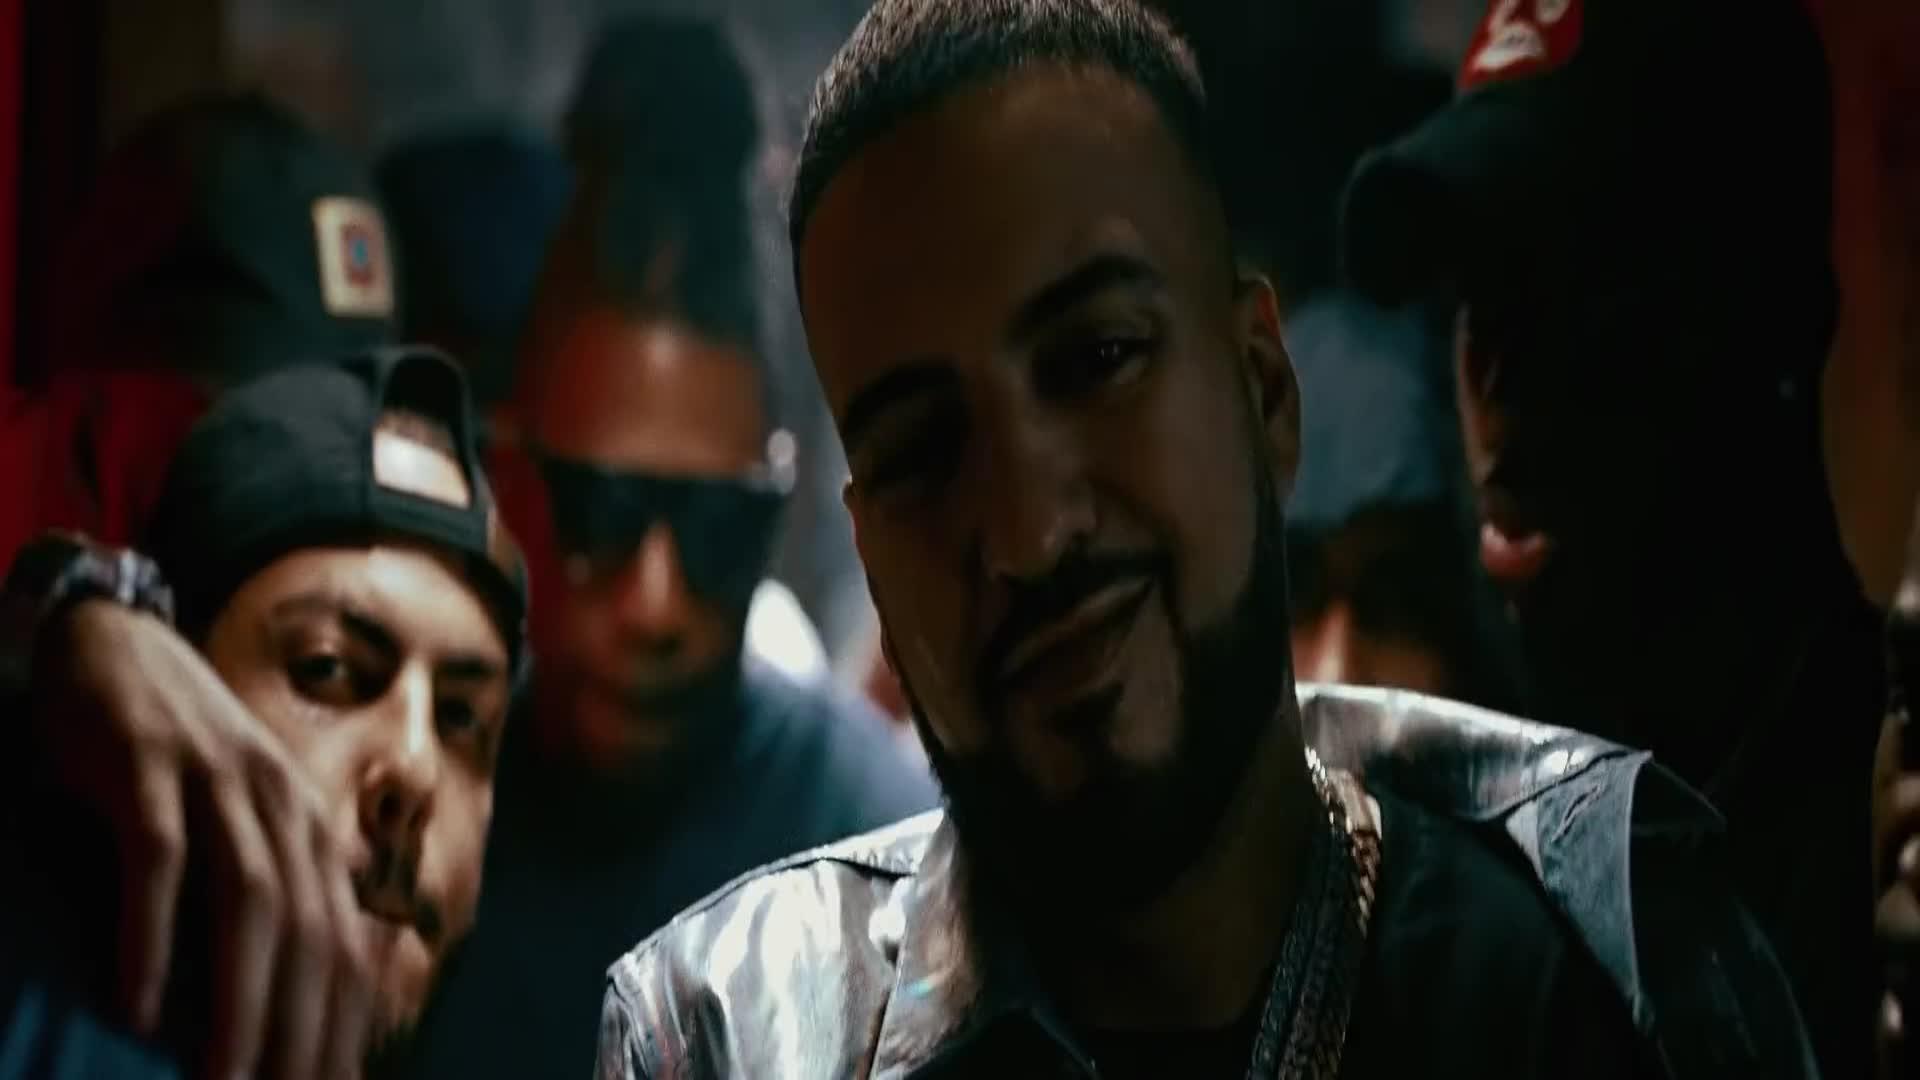 French Montana - What It Look Like